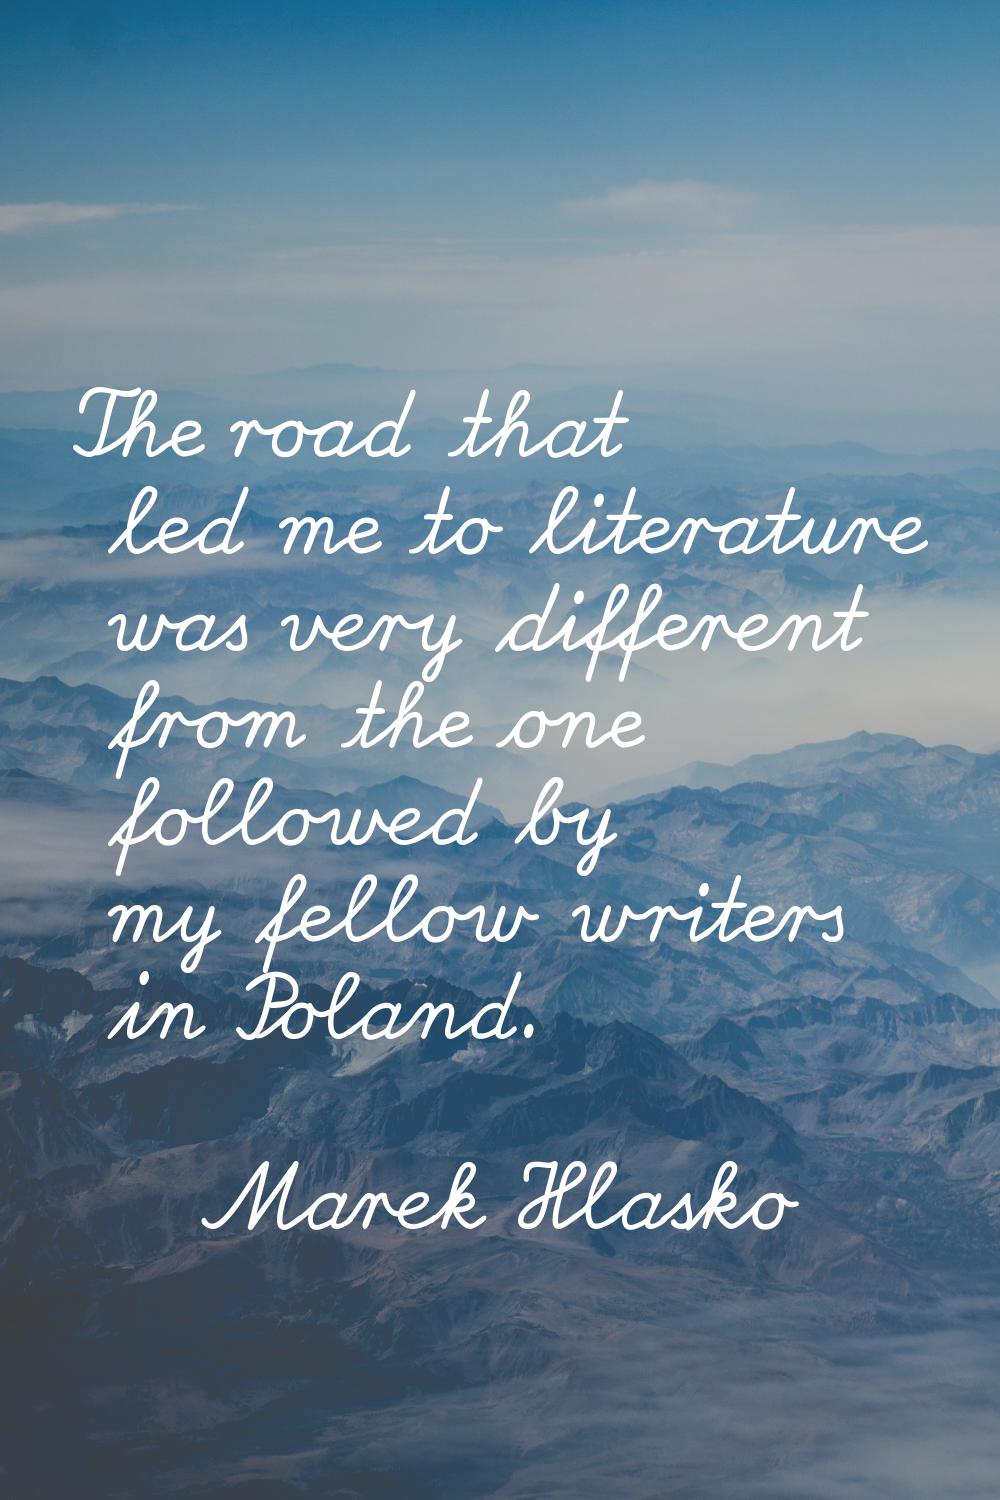 The road that led me to literature was very different from the one followed by my fellow writers in